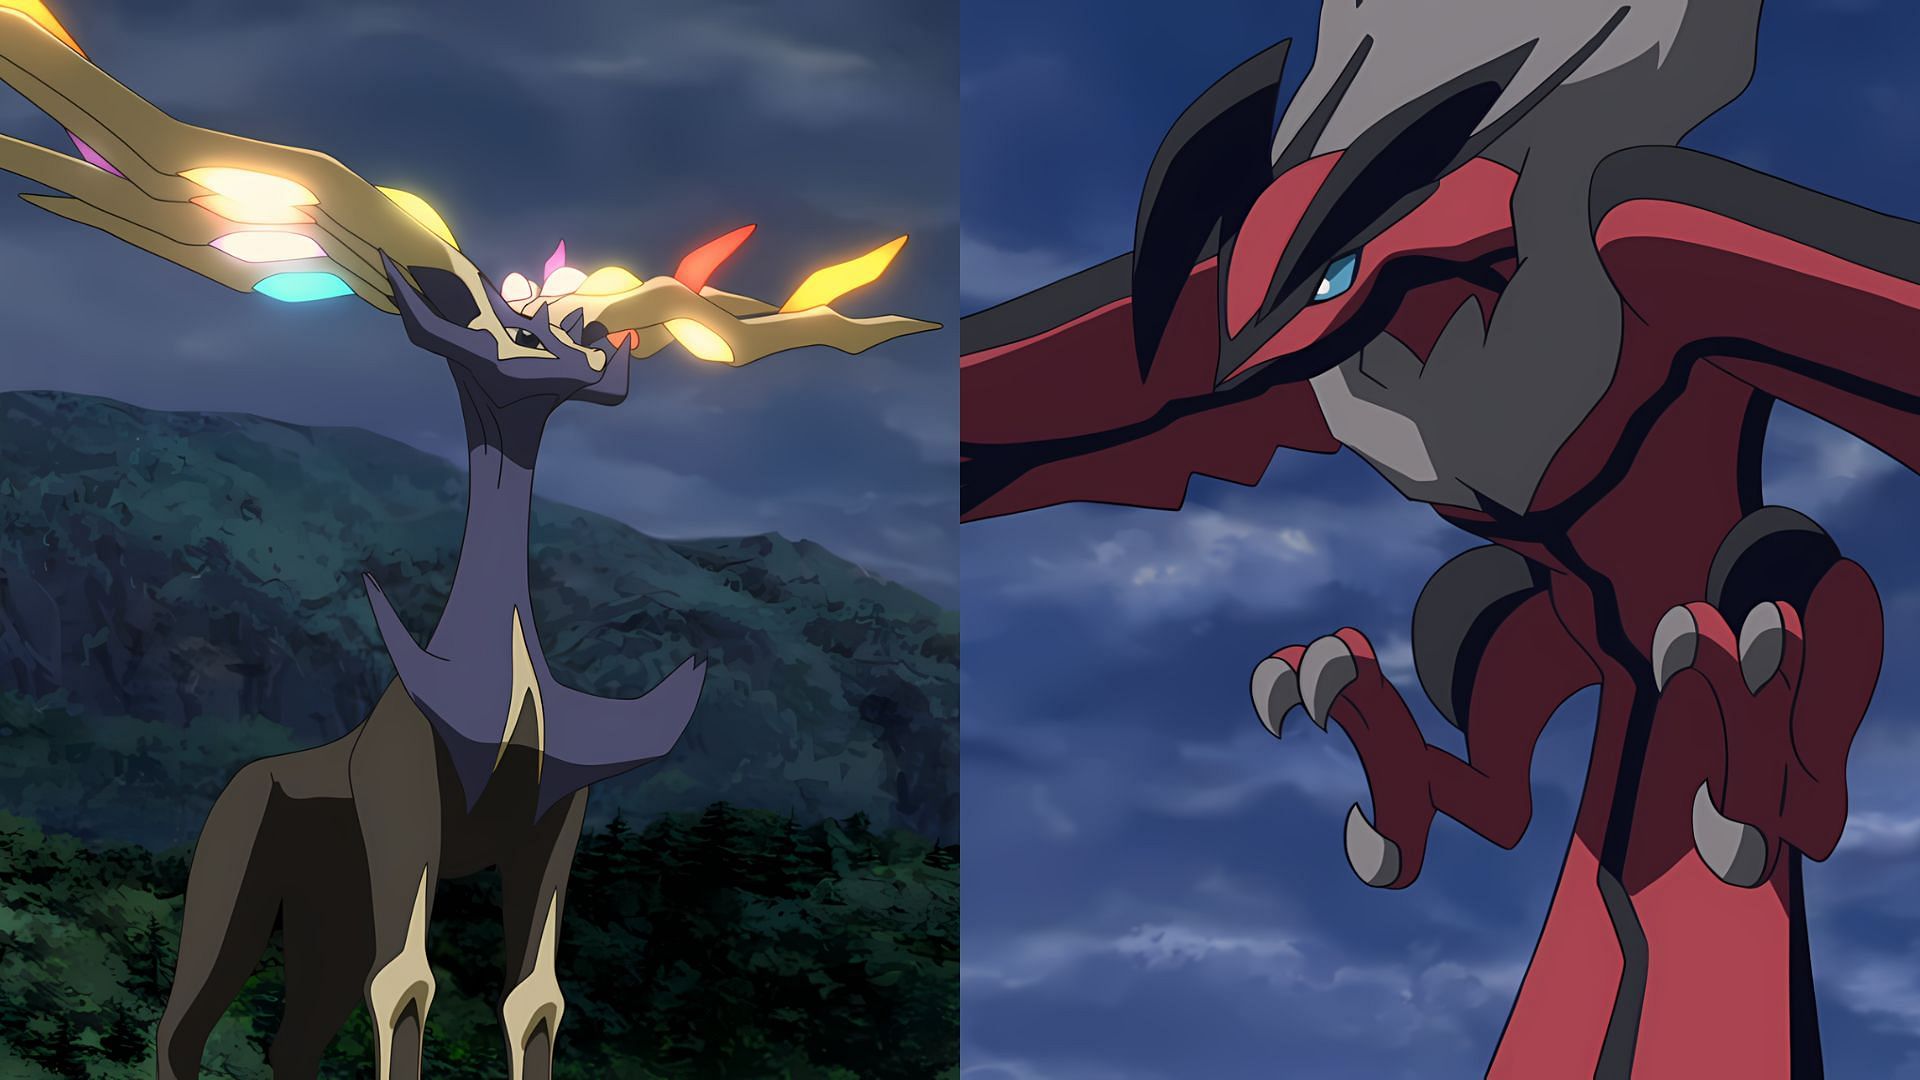 Xerneas and Yveltal as seen in the anime (Image via TPC)